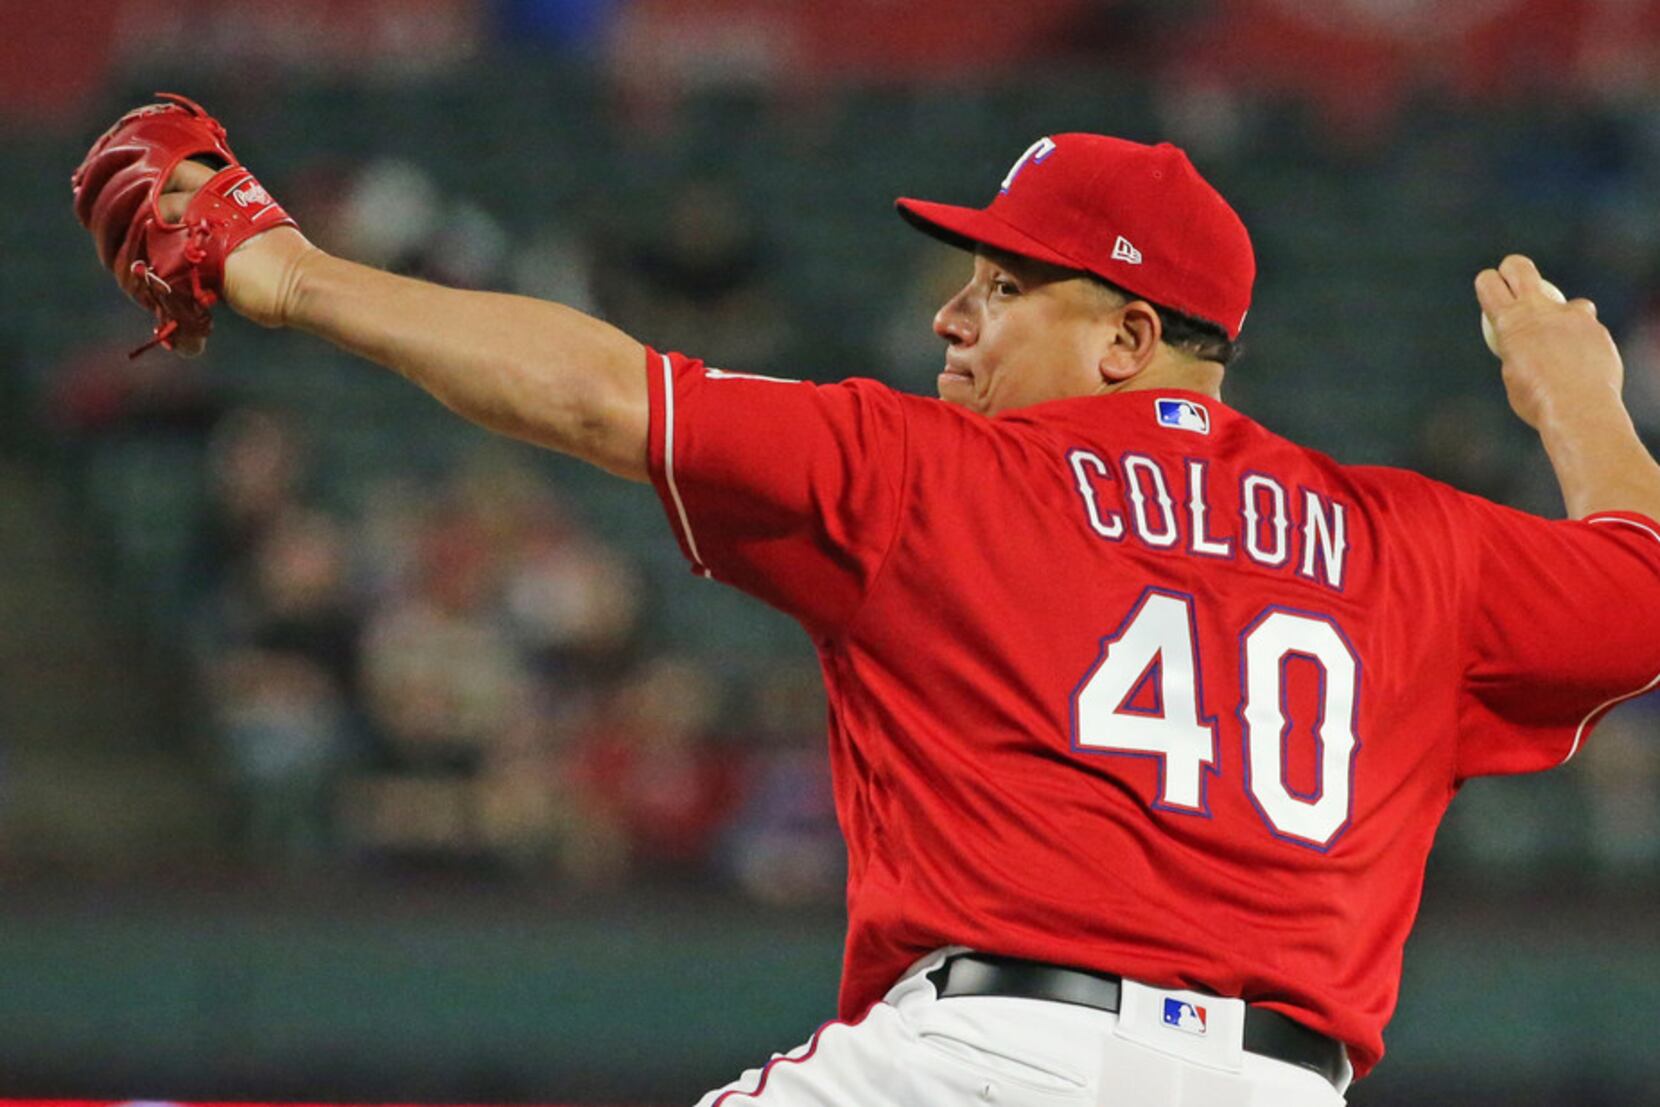 Bartolo Colon's pitching is even more amazing than his hitting